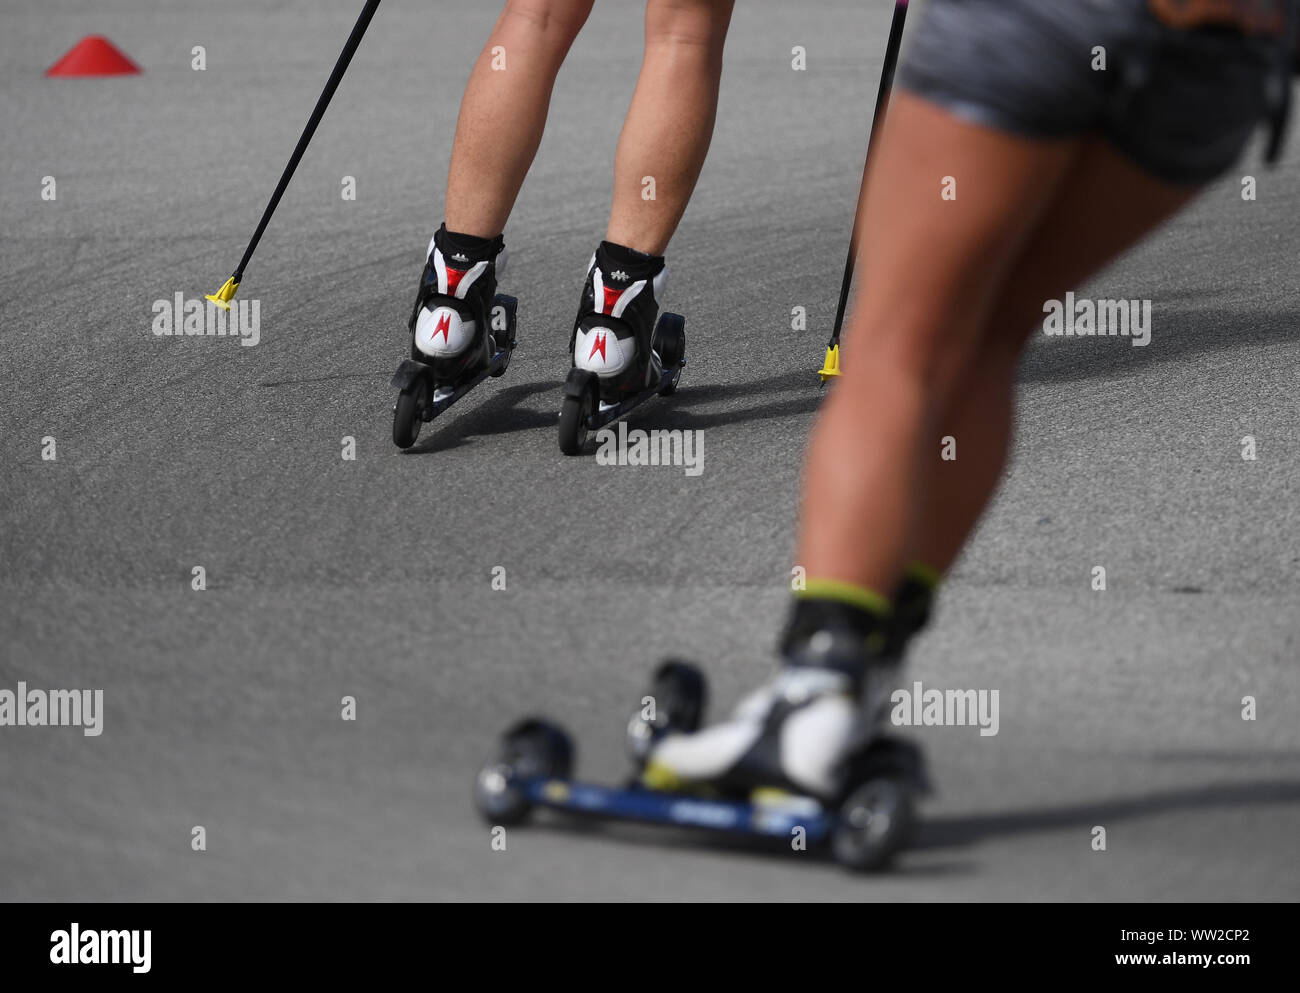 Ruhpolding, Germany. 12th Sep, 2019. Biathletes train on roller skis at the Biathlon Media Day of the German Ski Association. Credit: Angelika Warmuth/dpa/Alamy Live News Stock Photo